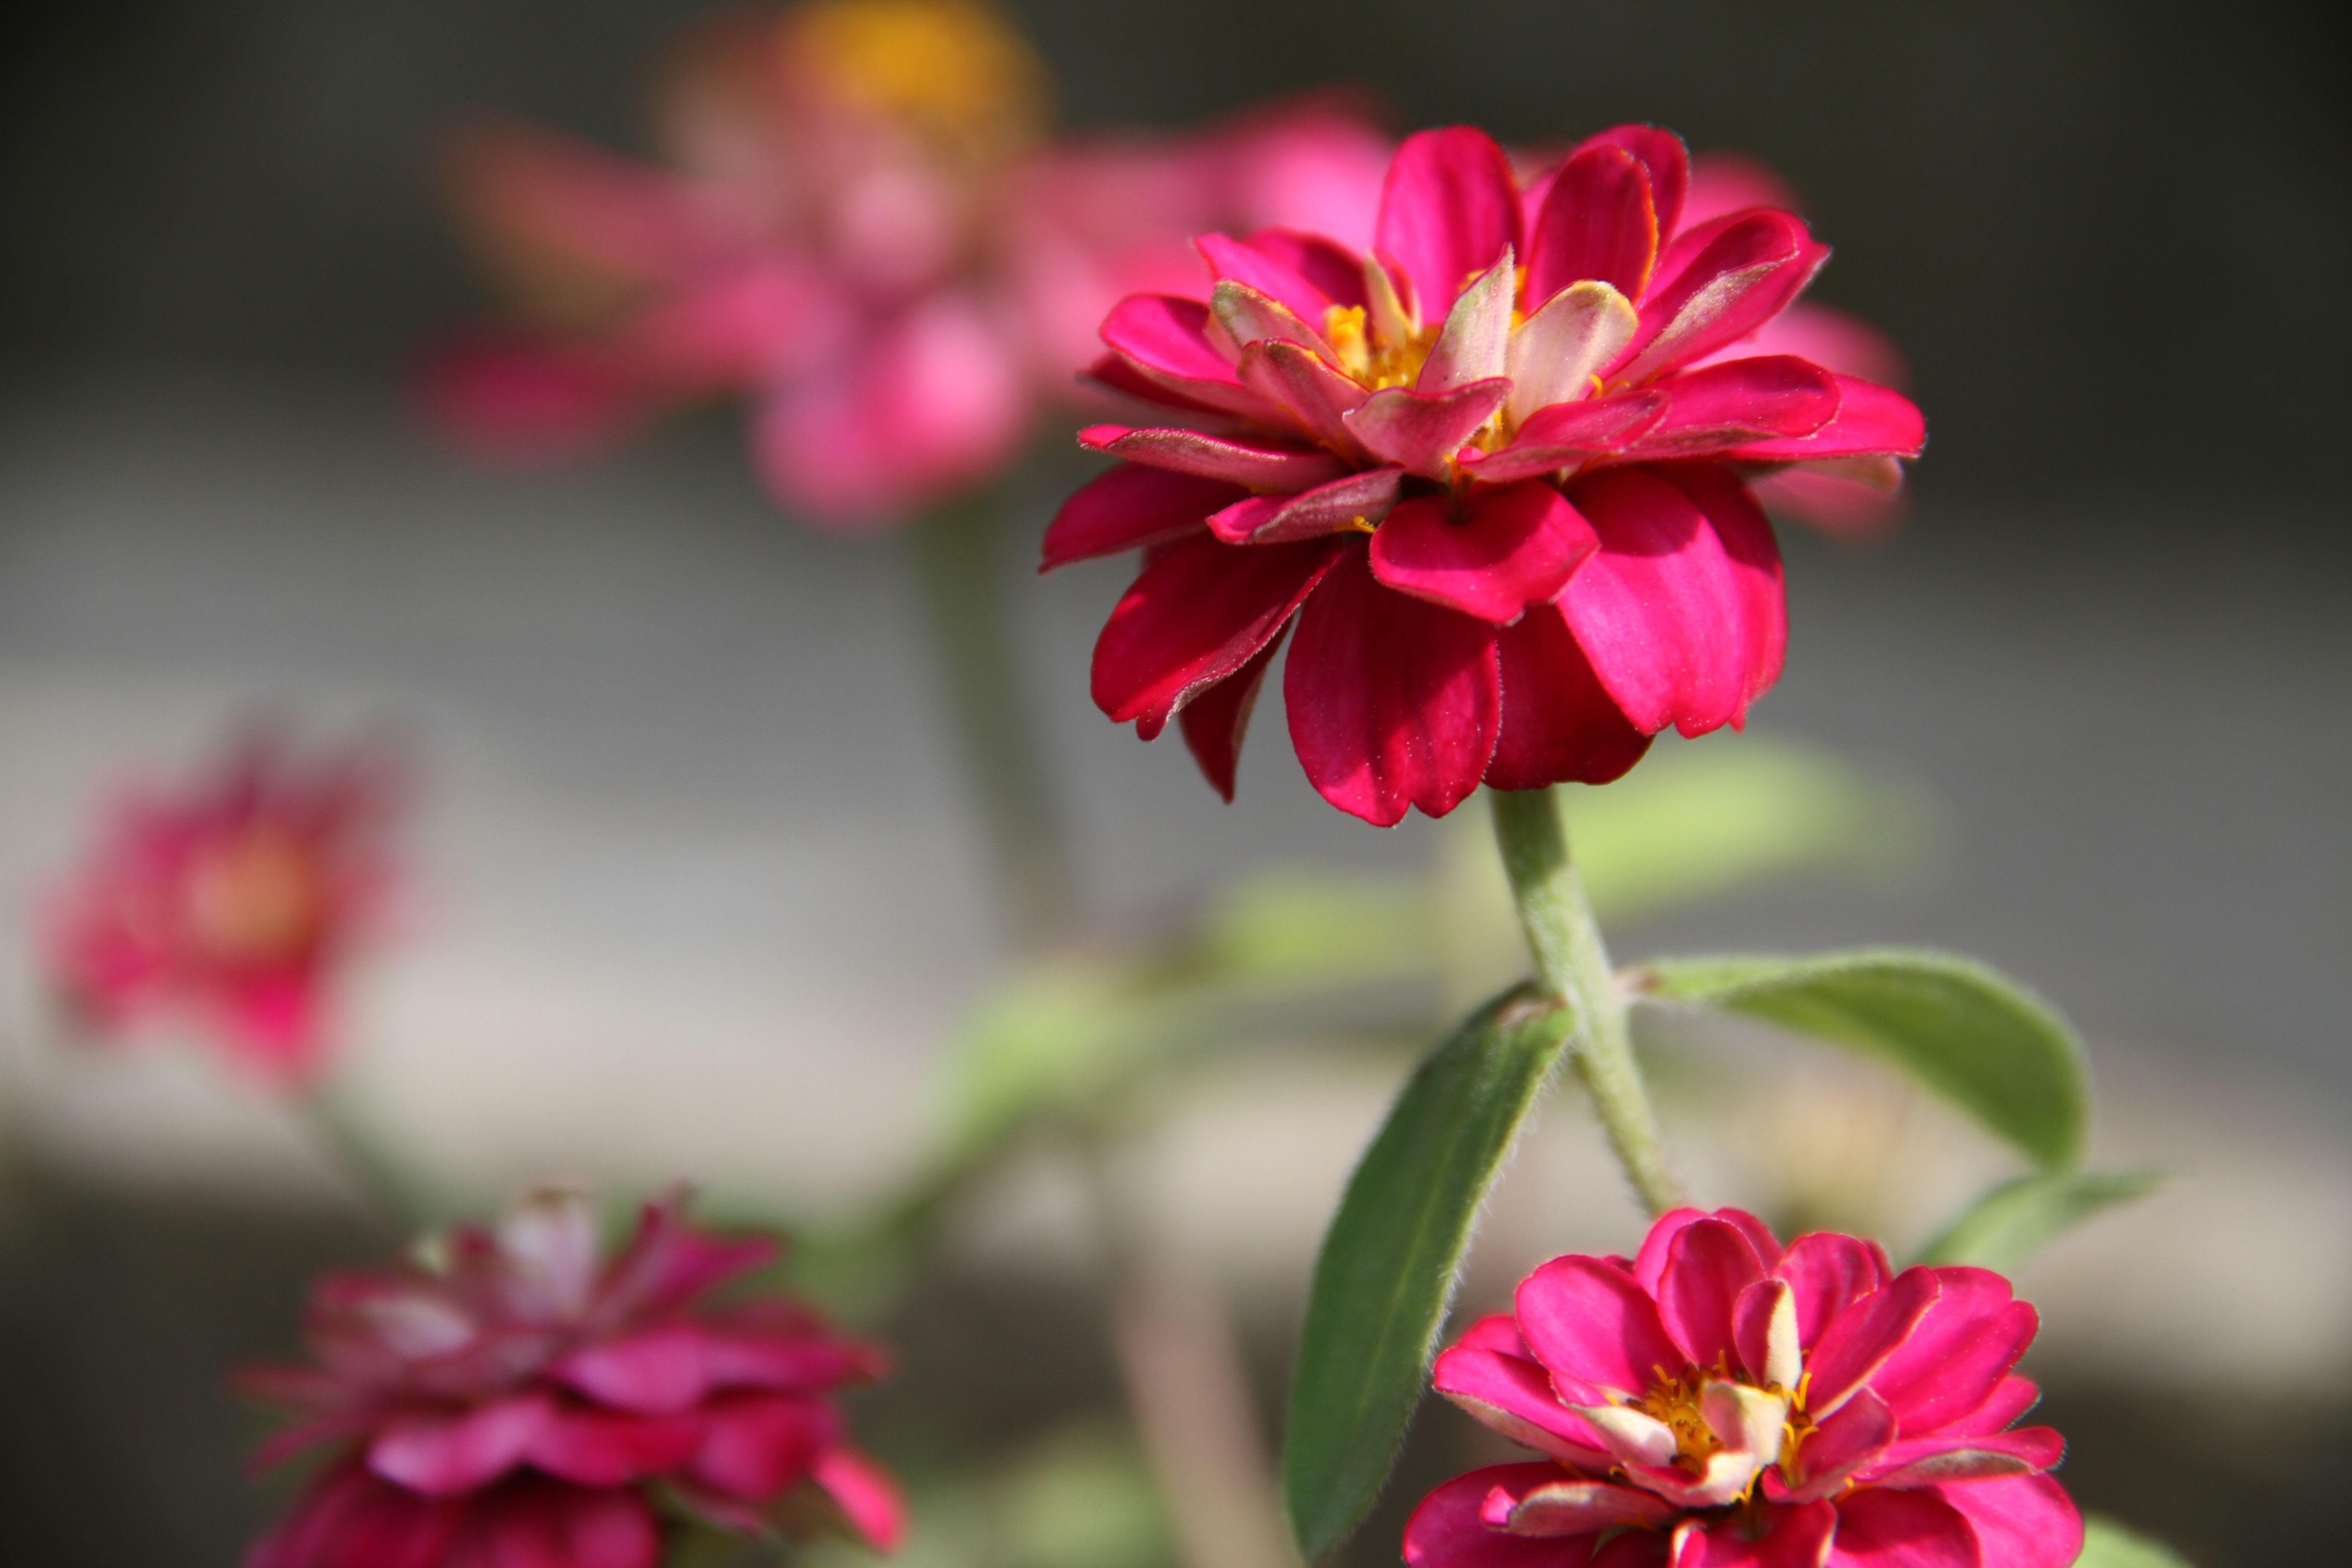 And I finally planted some zinnias in my outdoor pots by the front door.